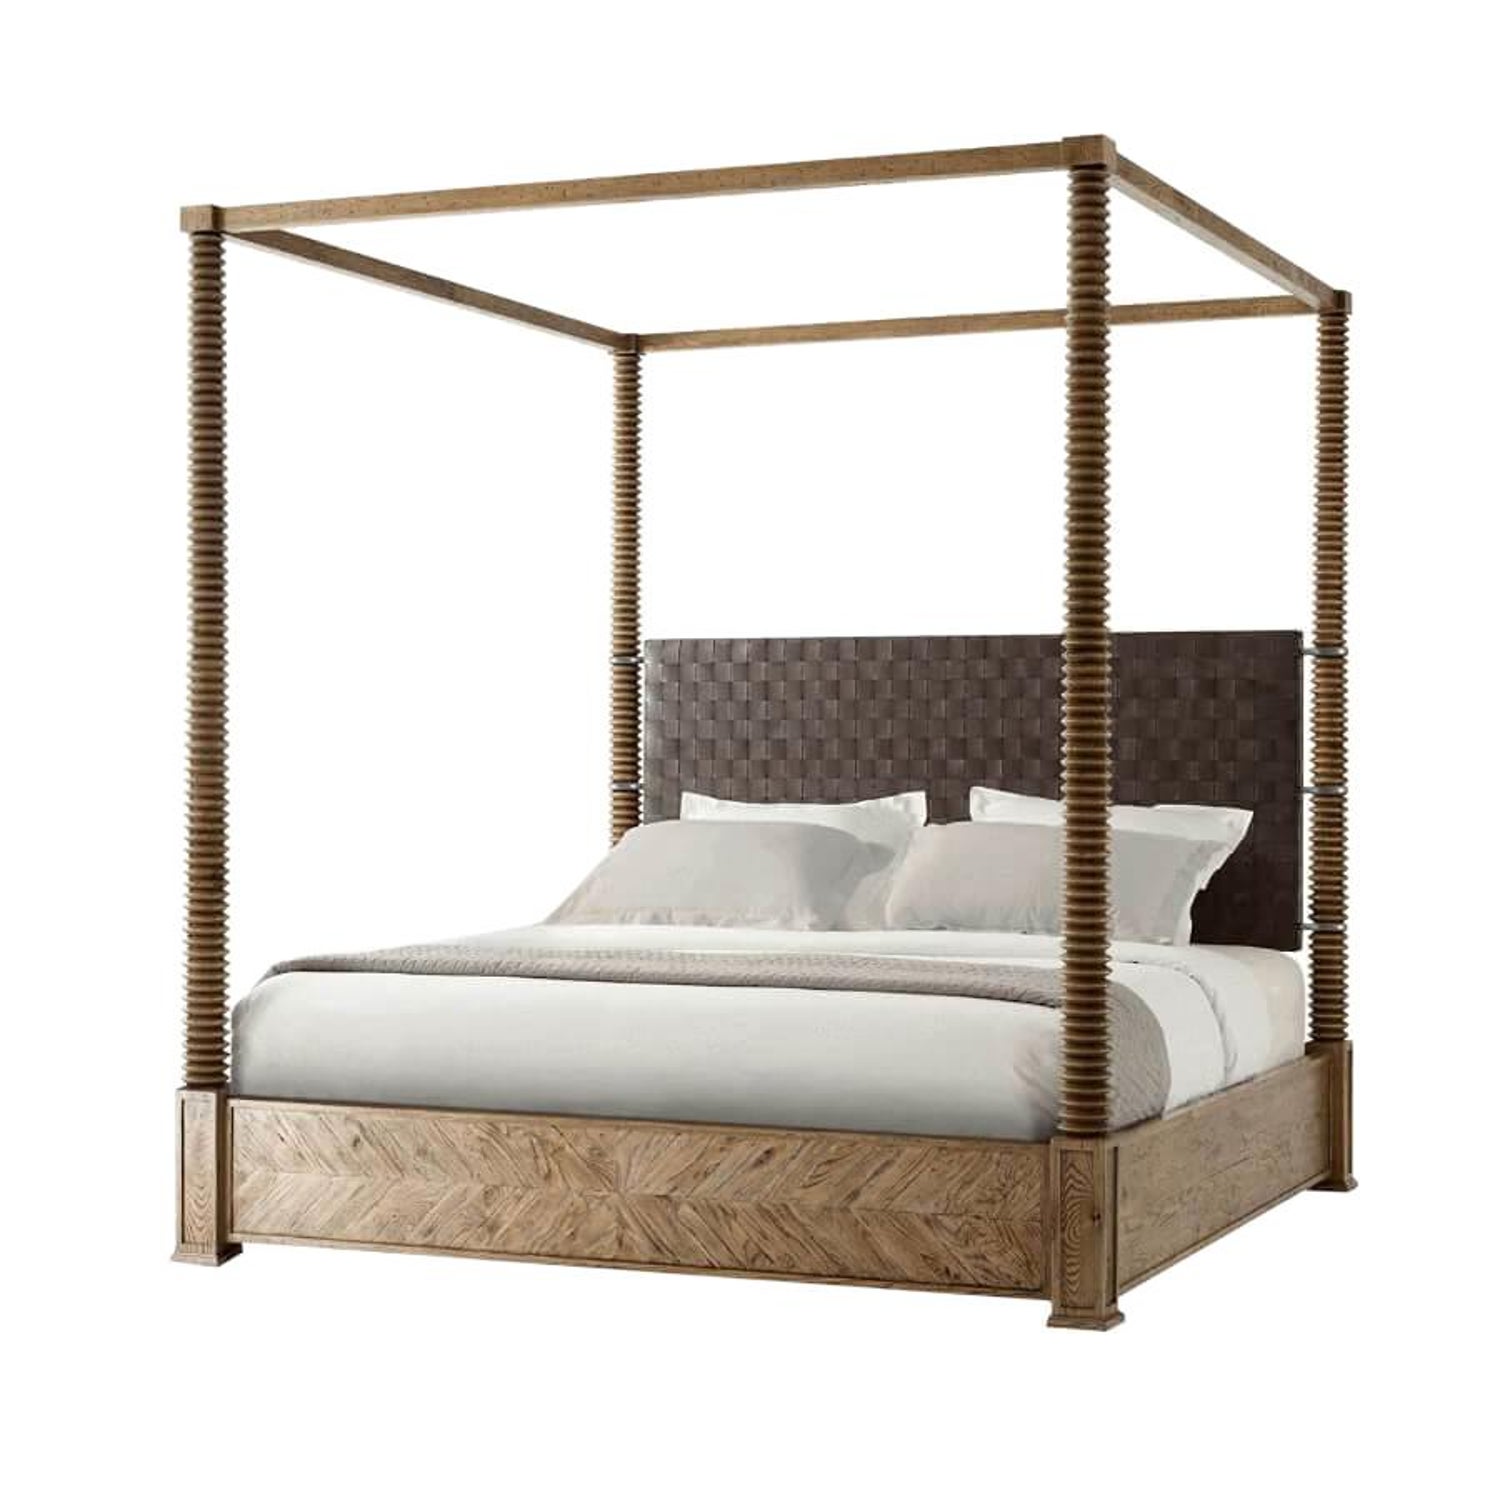 Modern European Four Post King Bed For, Rustic Four Poster King Bed